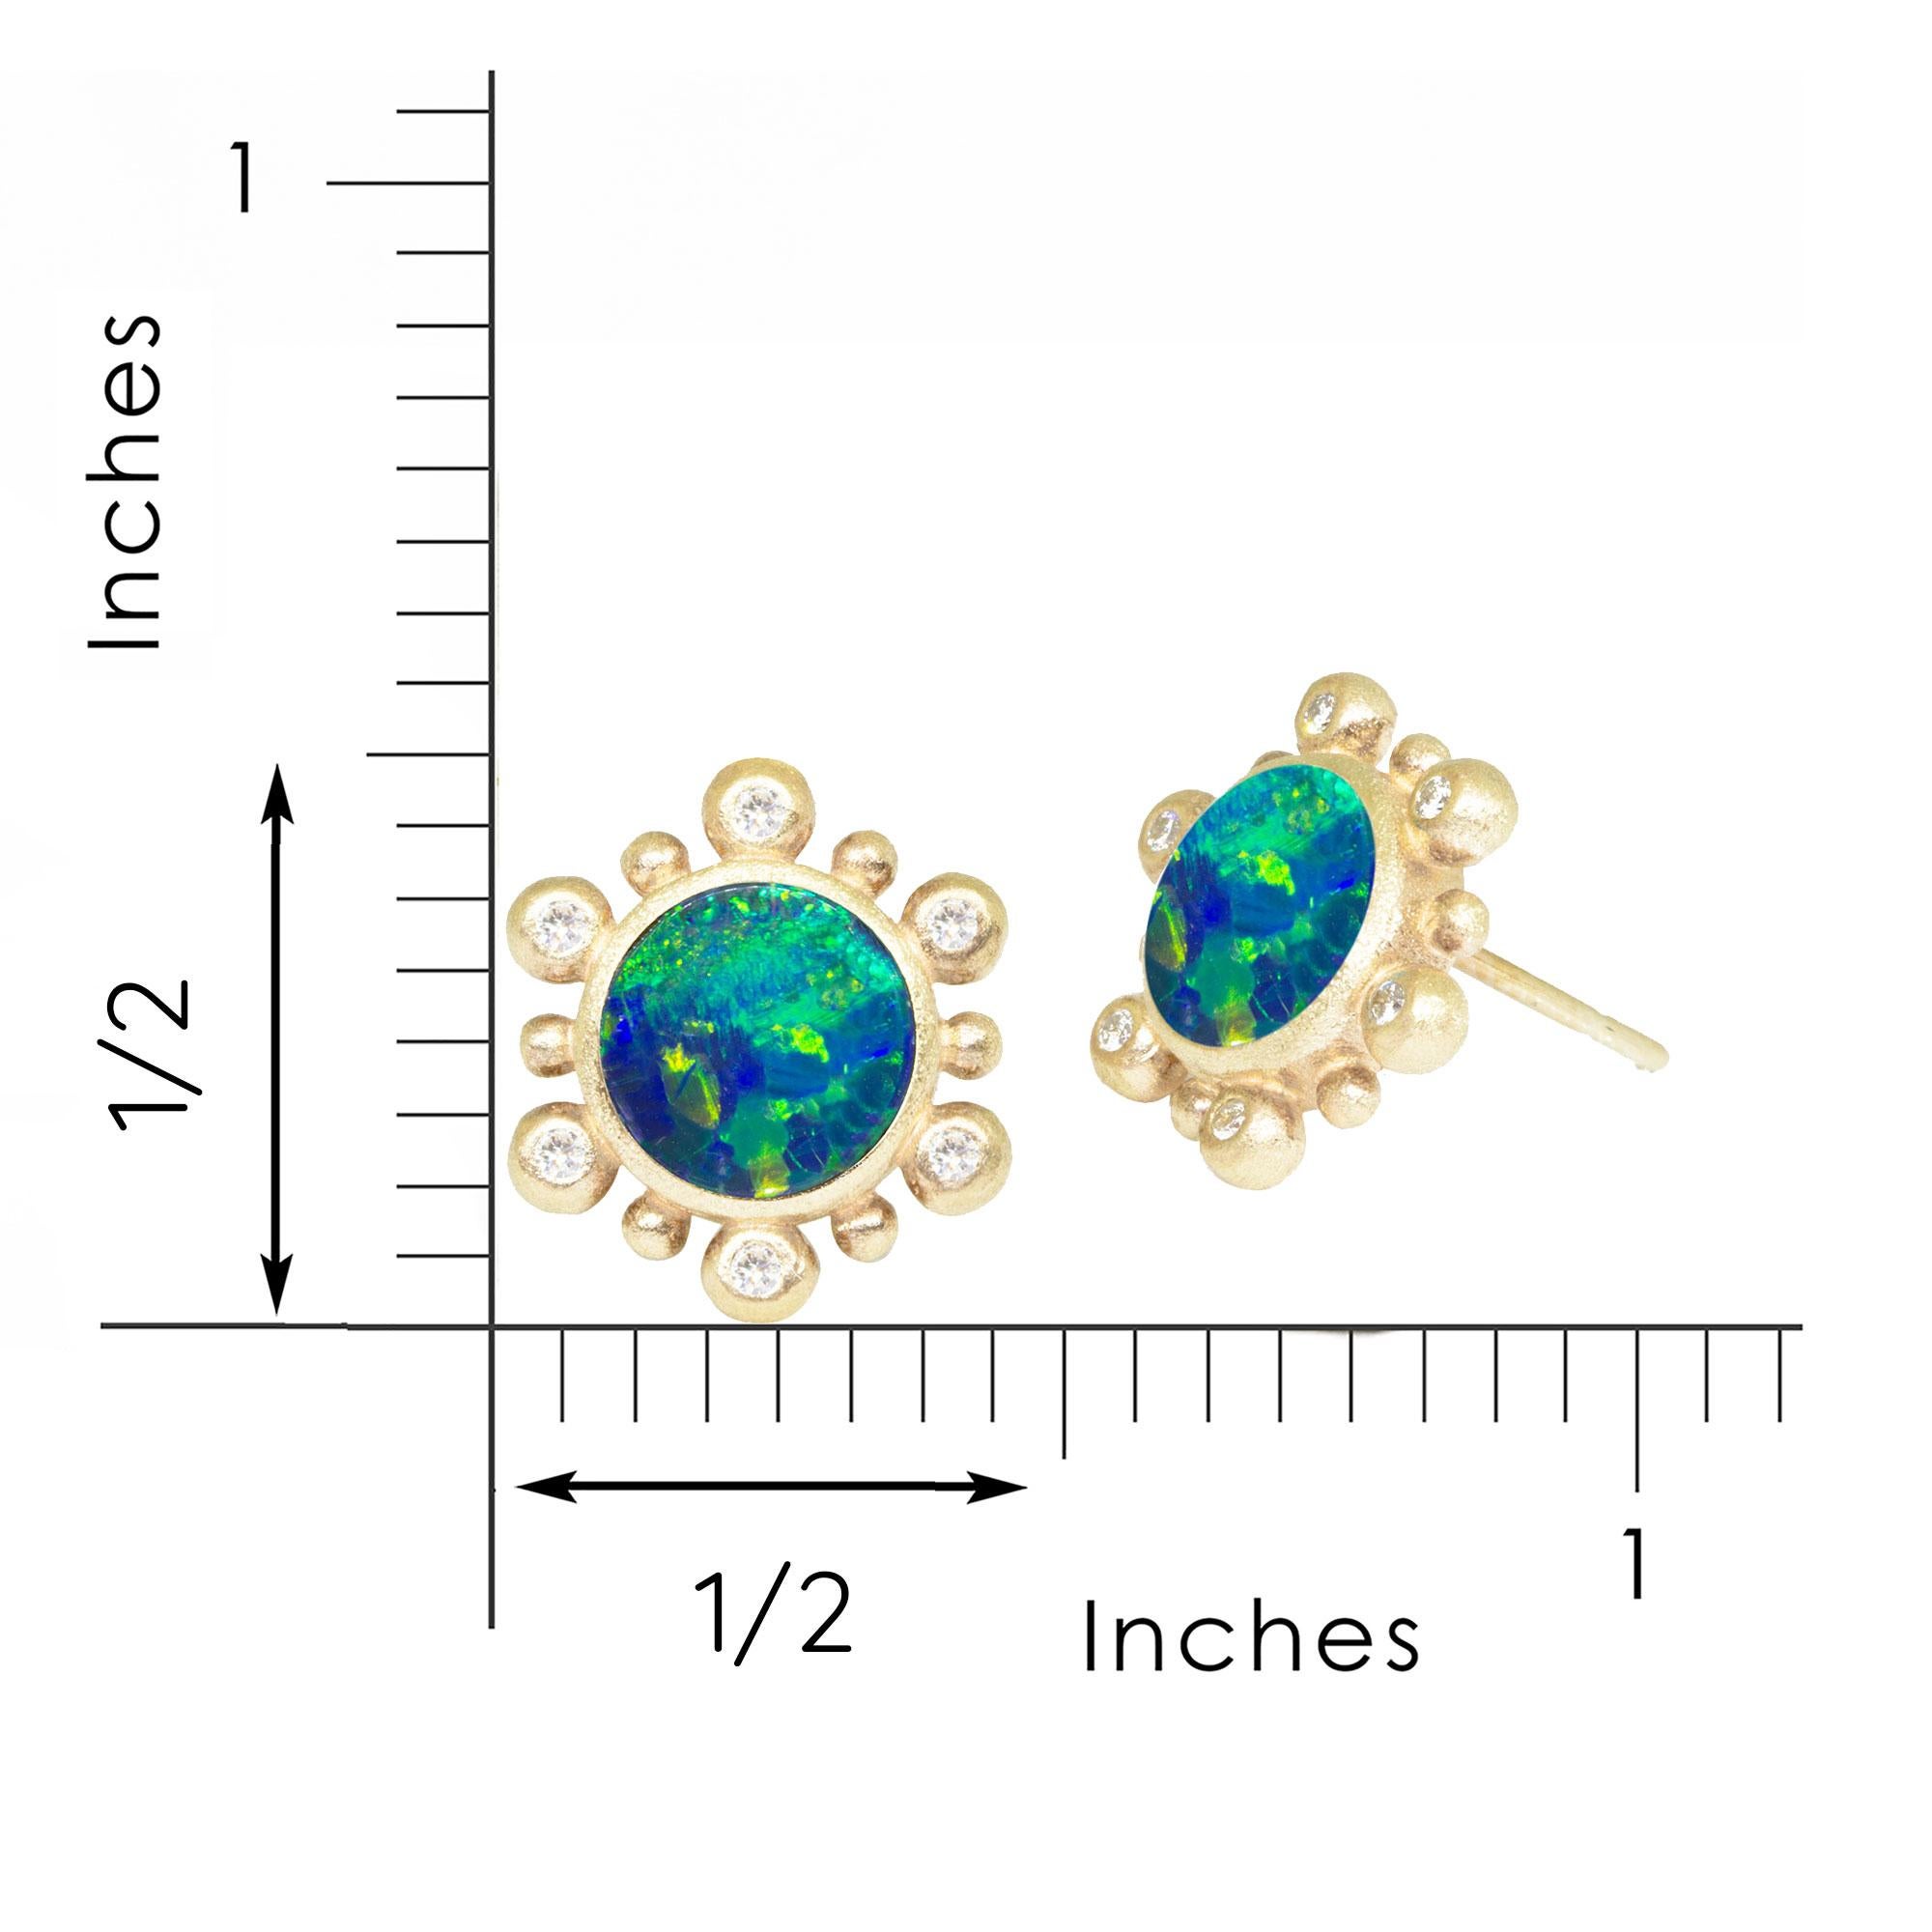 Nina Wynn Design's patent-pending earrings have an element on the back of the stud or charm to allow these pieces to transformed into multi-use, stackable and convertible styling. It can be turned into a pendant and worn on a necklace, or used as a